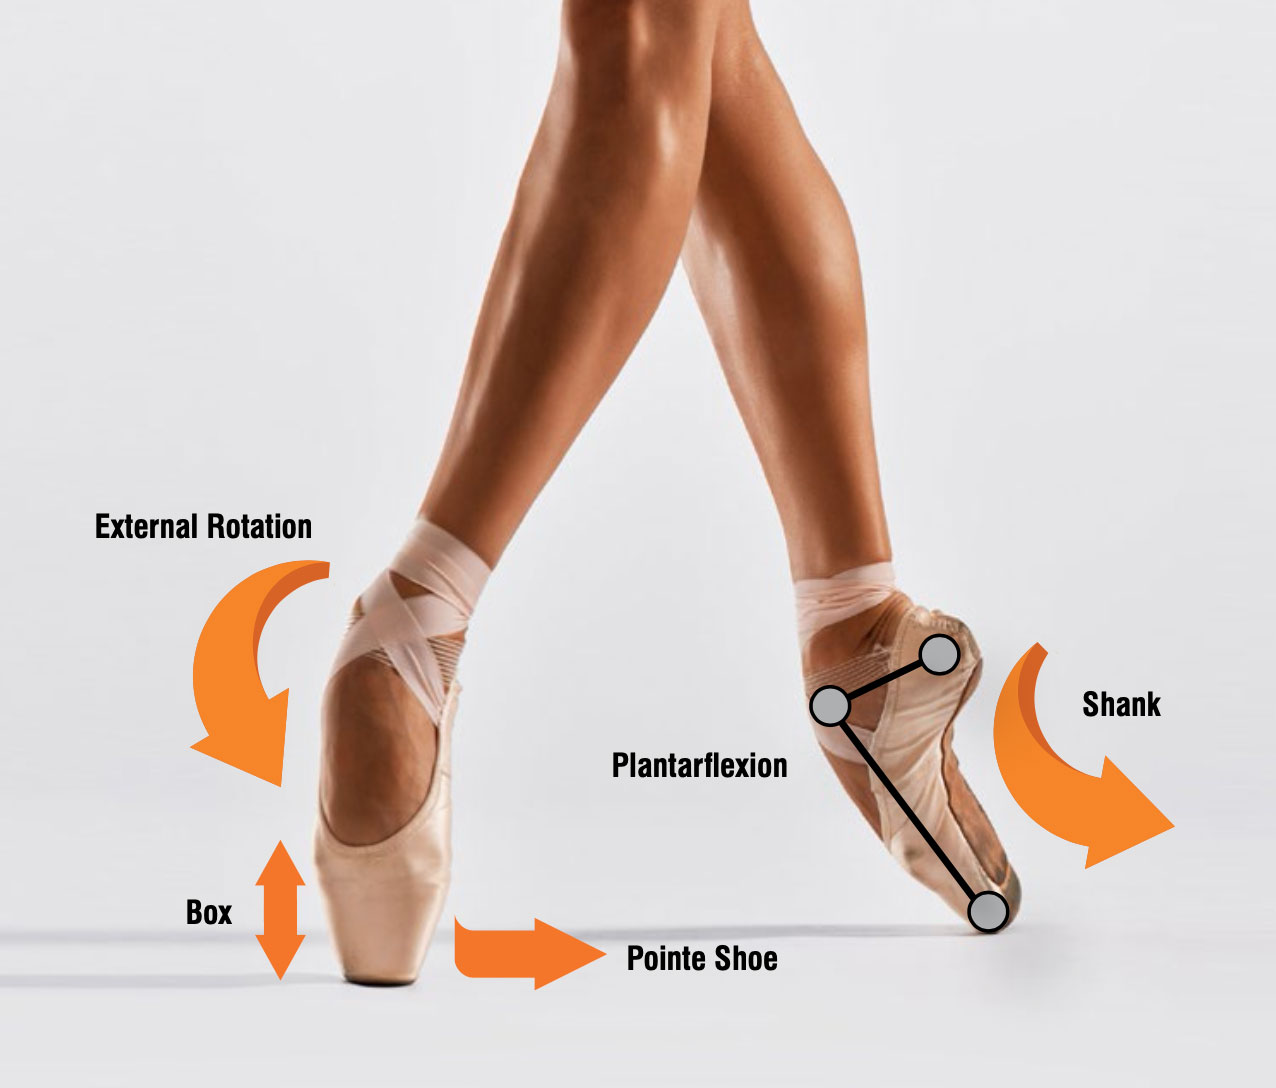 Biomechanical Risks Associated with Foot and Ankle Injuries in Ballet Dancers